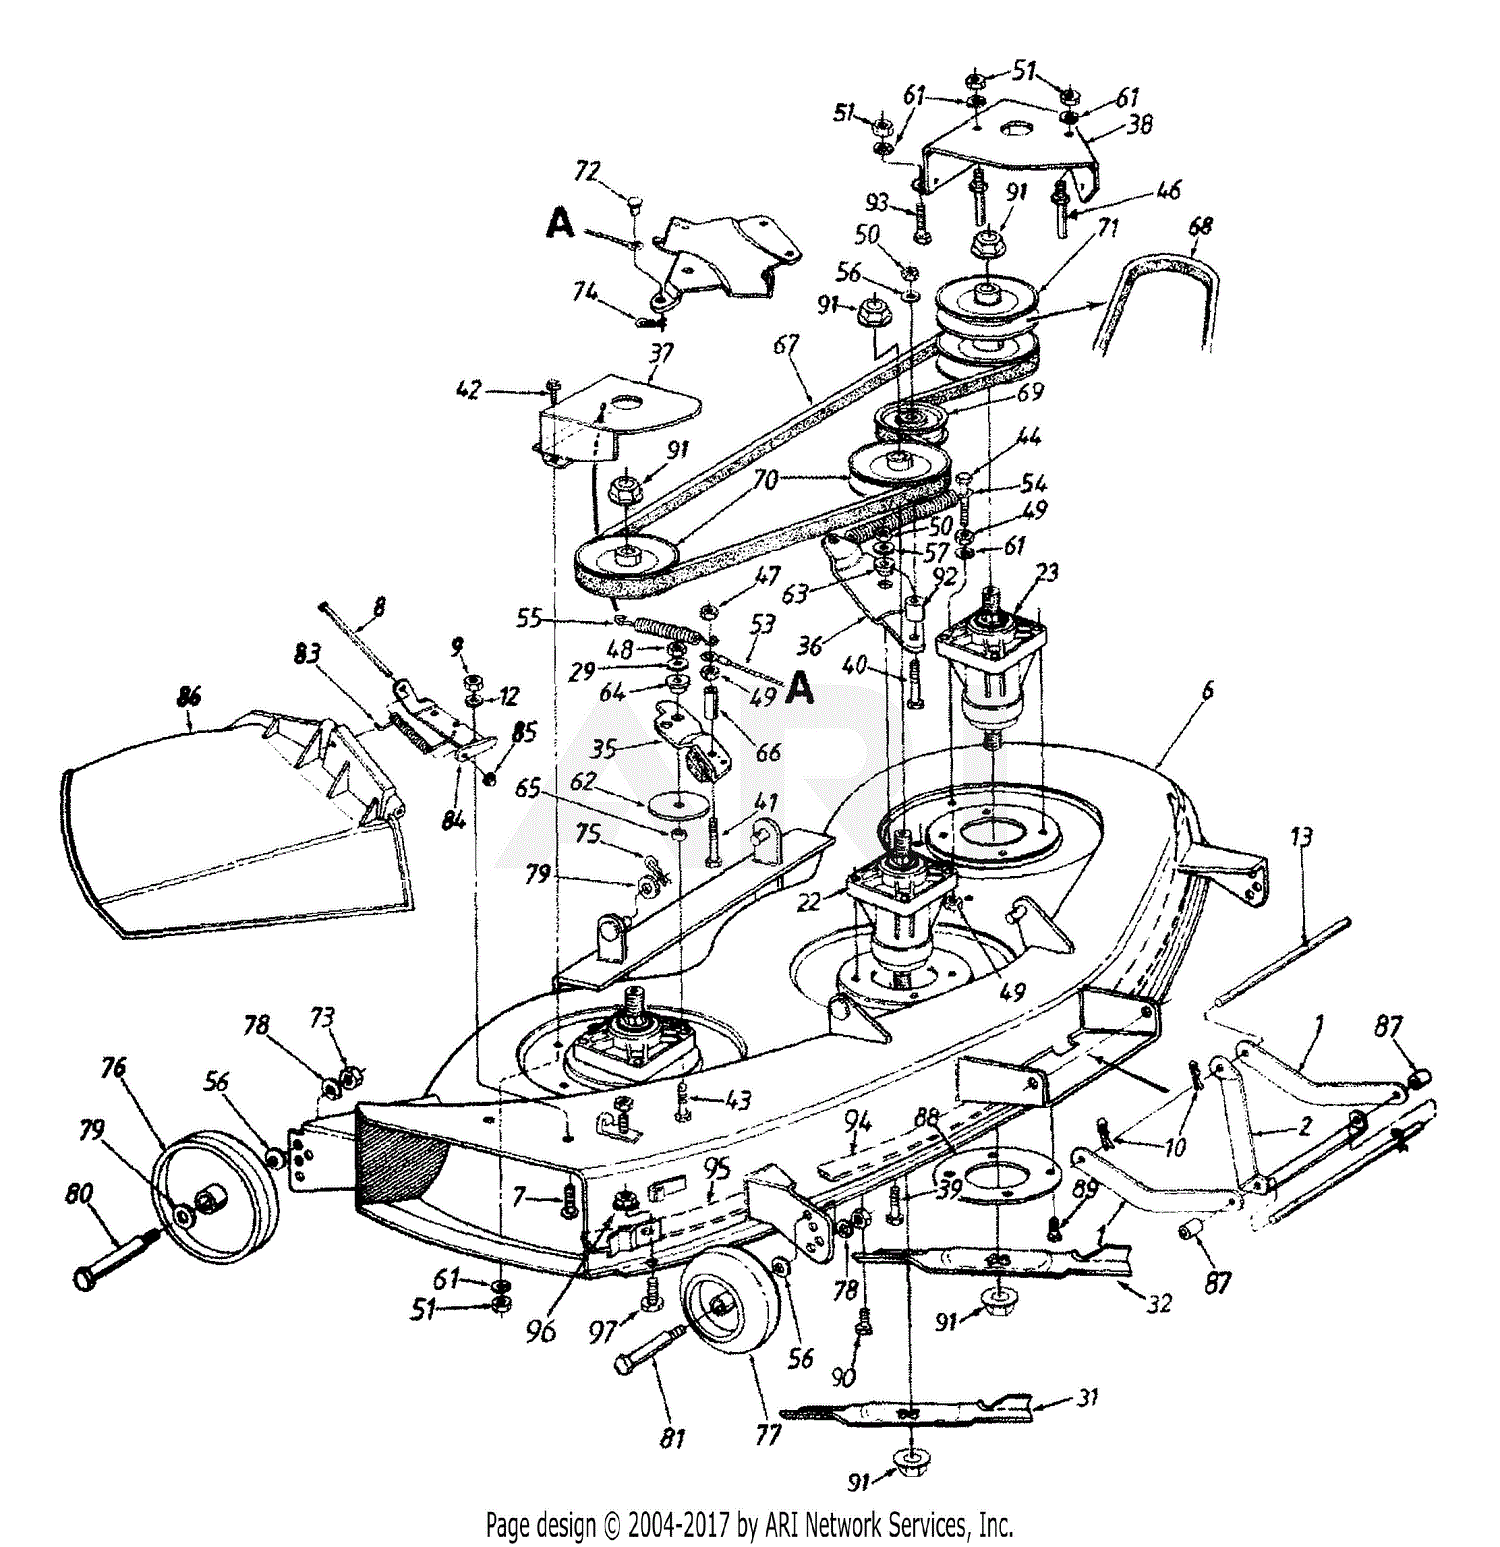 13An601H729 Ignition Smart Switch Wiring Diagram from az417944.vo.msecnd.net